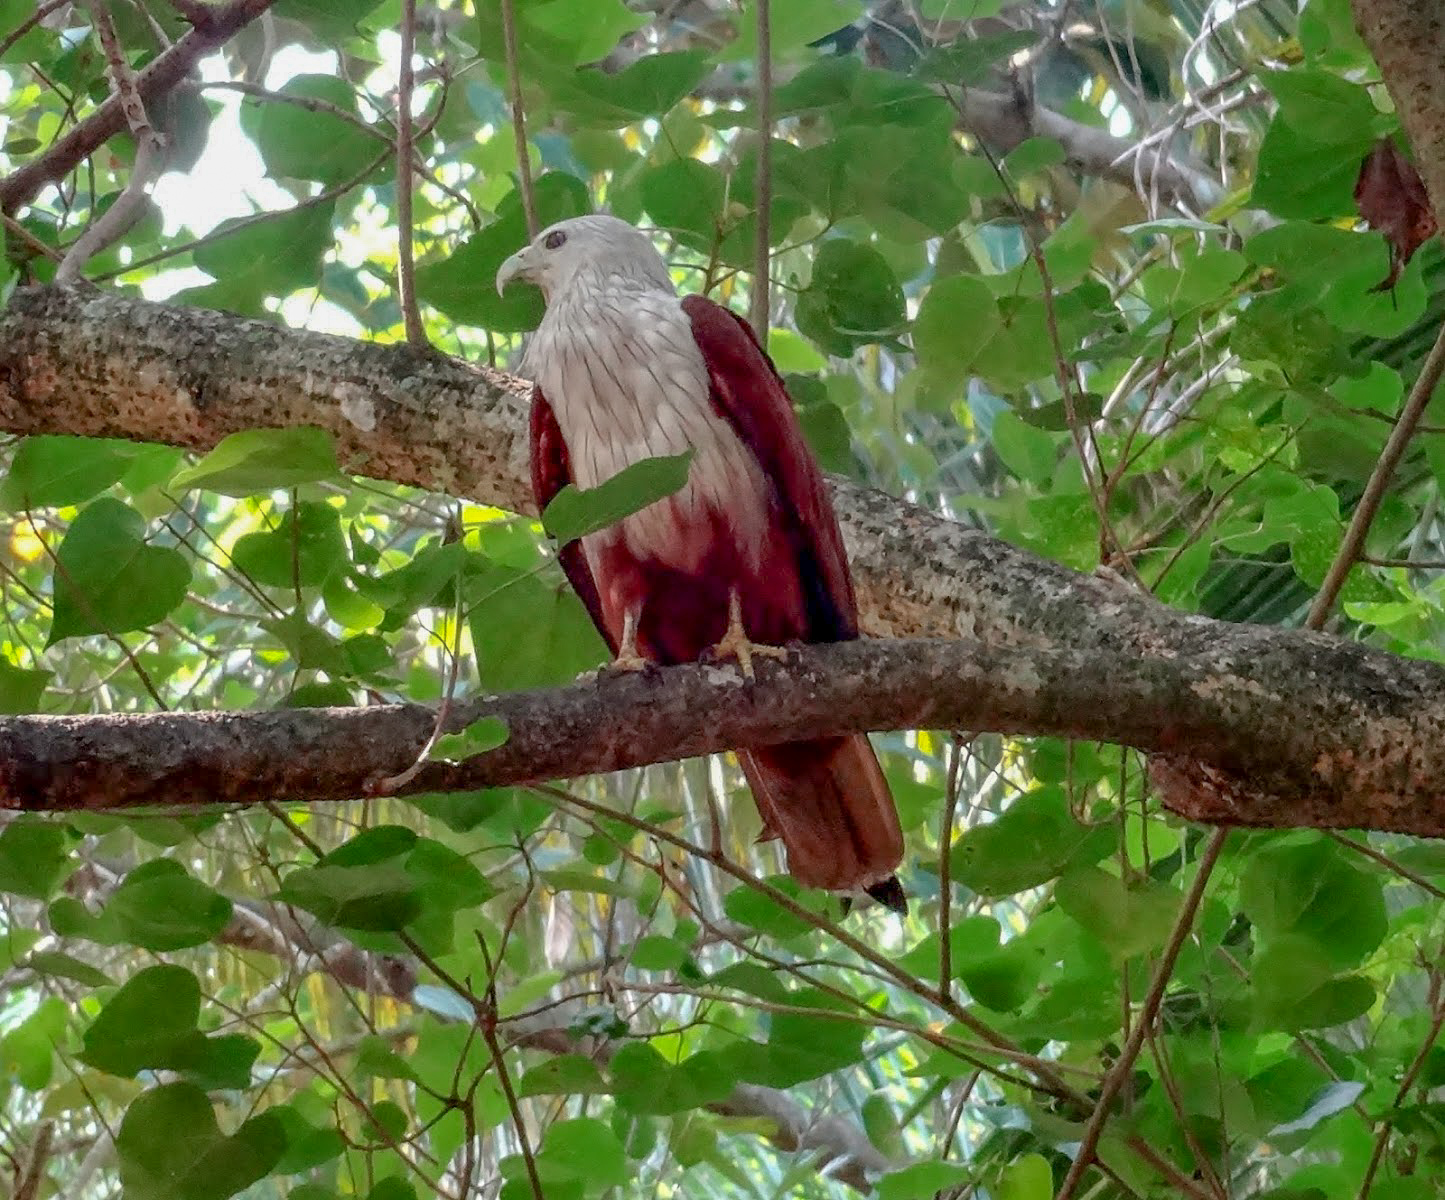 A Brahminy kite bird sits on a tree branch, behind are green leaves, in the Kappil Backwaters, Kerala, India